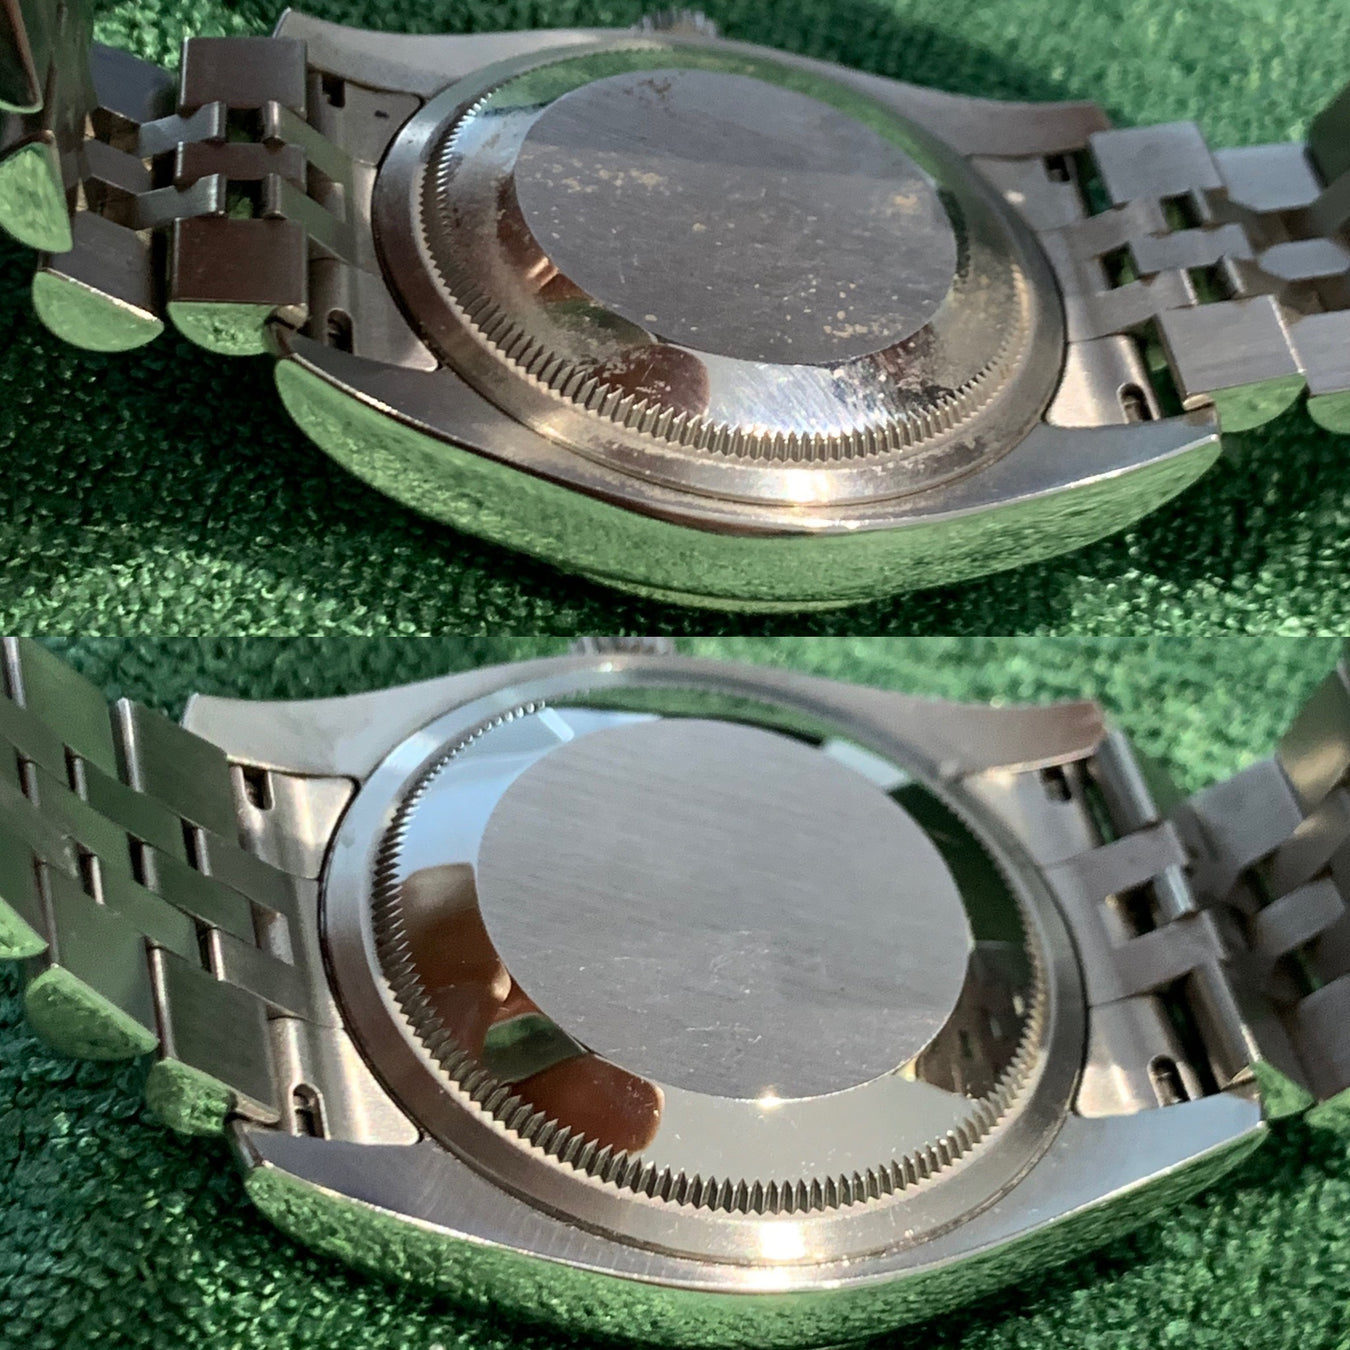 before and after watch cleaning images